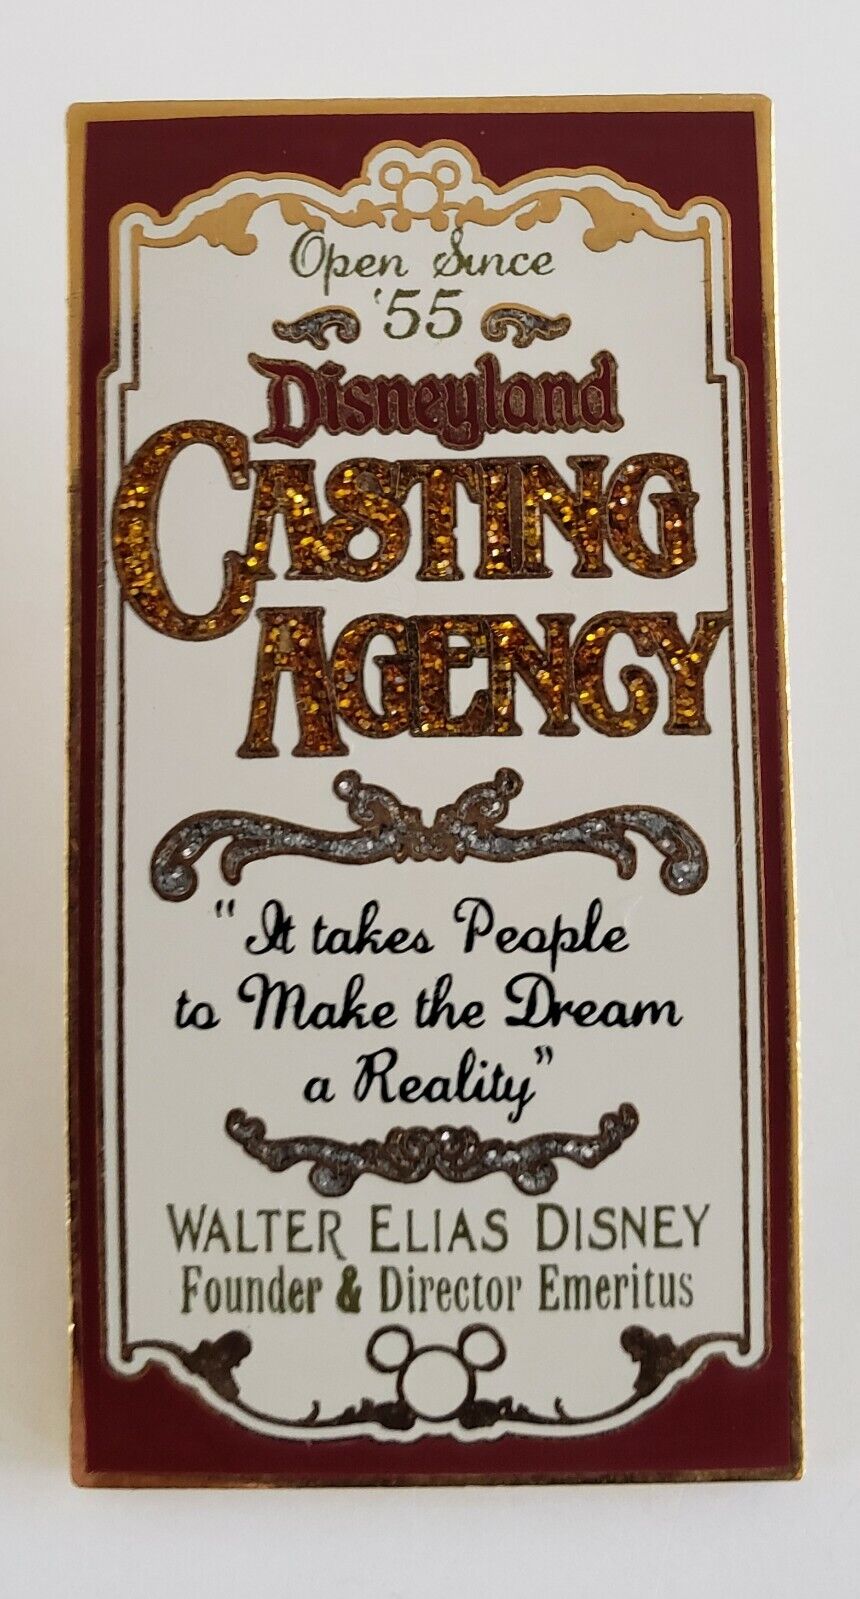 DISNEY CAST EXCL DISNEYLAND 50TH CASTING AGENCY WINDOW LE 3000 PIN-FREE SHIPPING